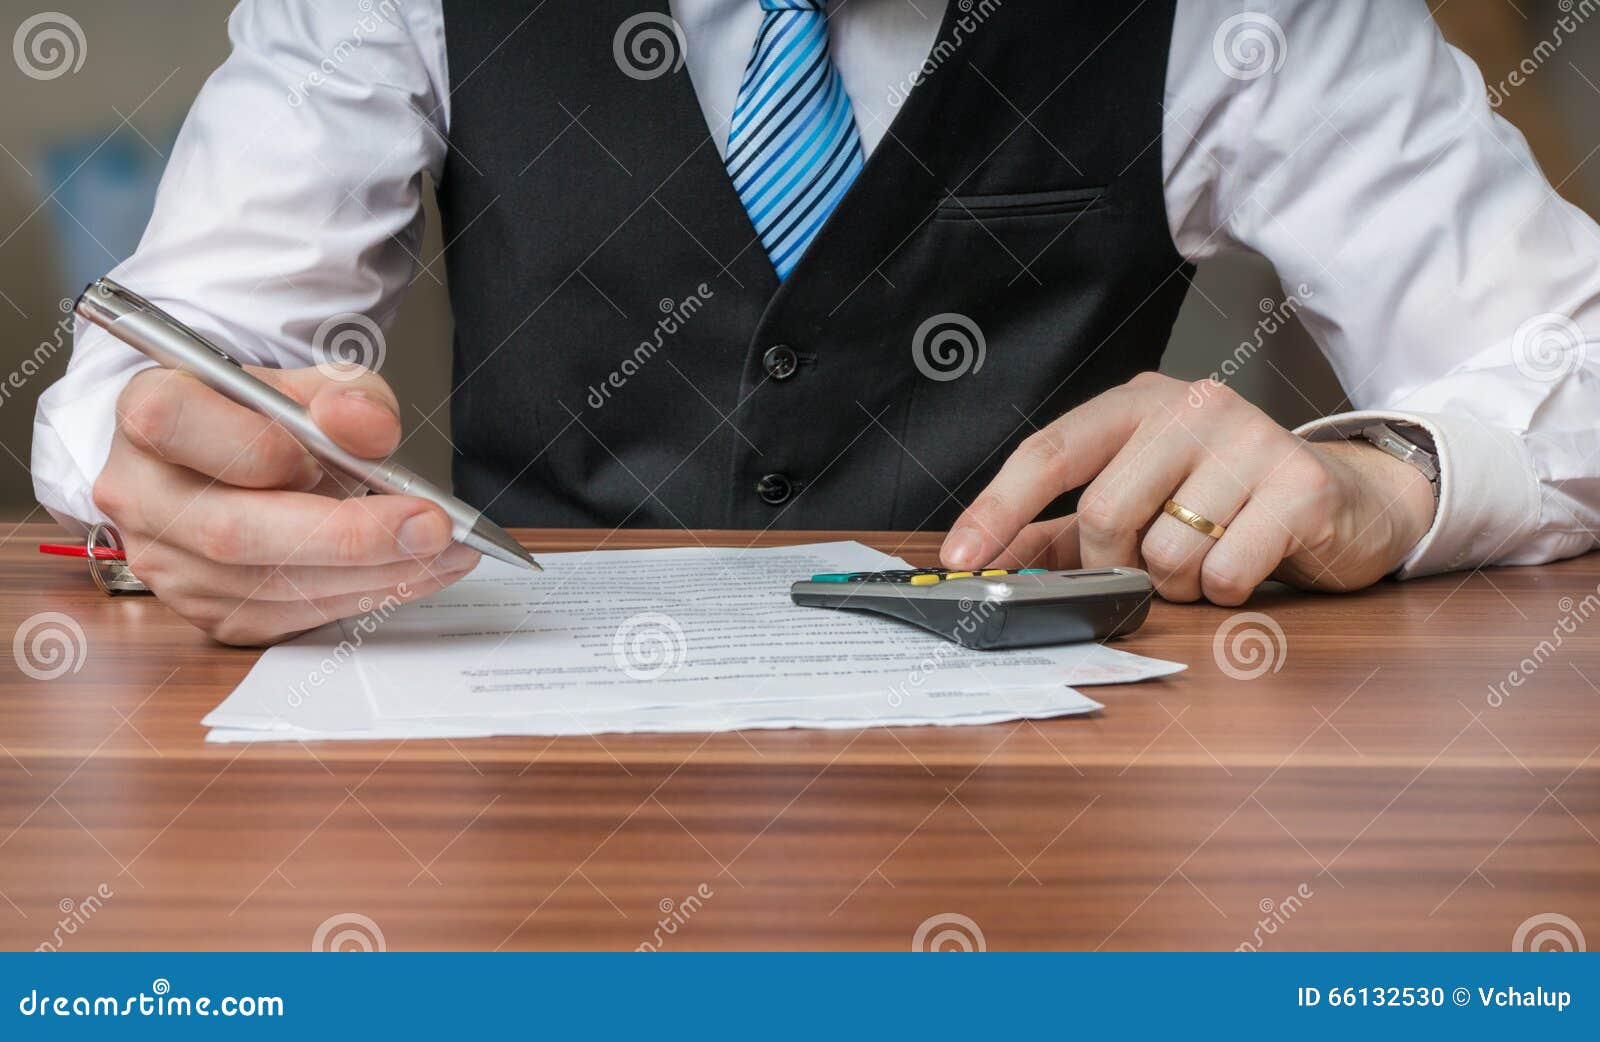 accountant or business man is calculating taxes with calculator